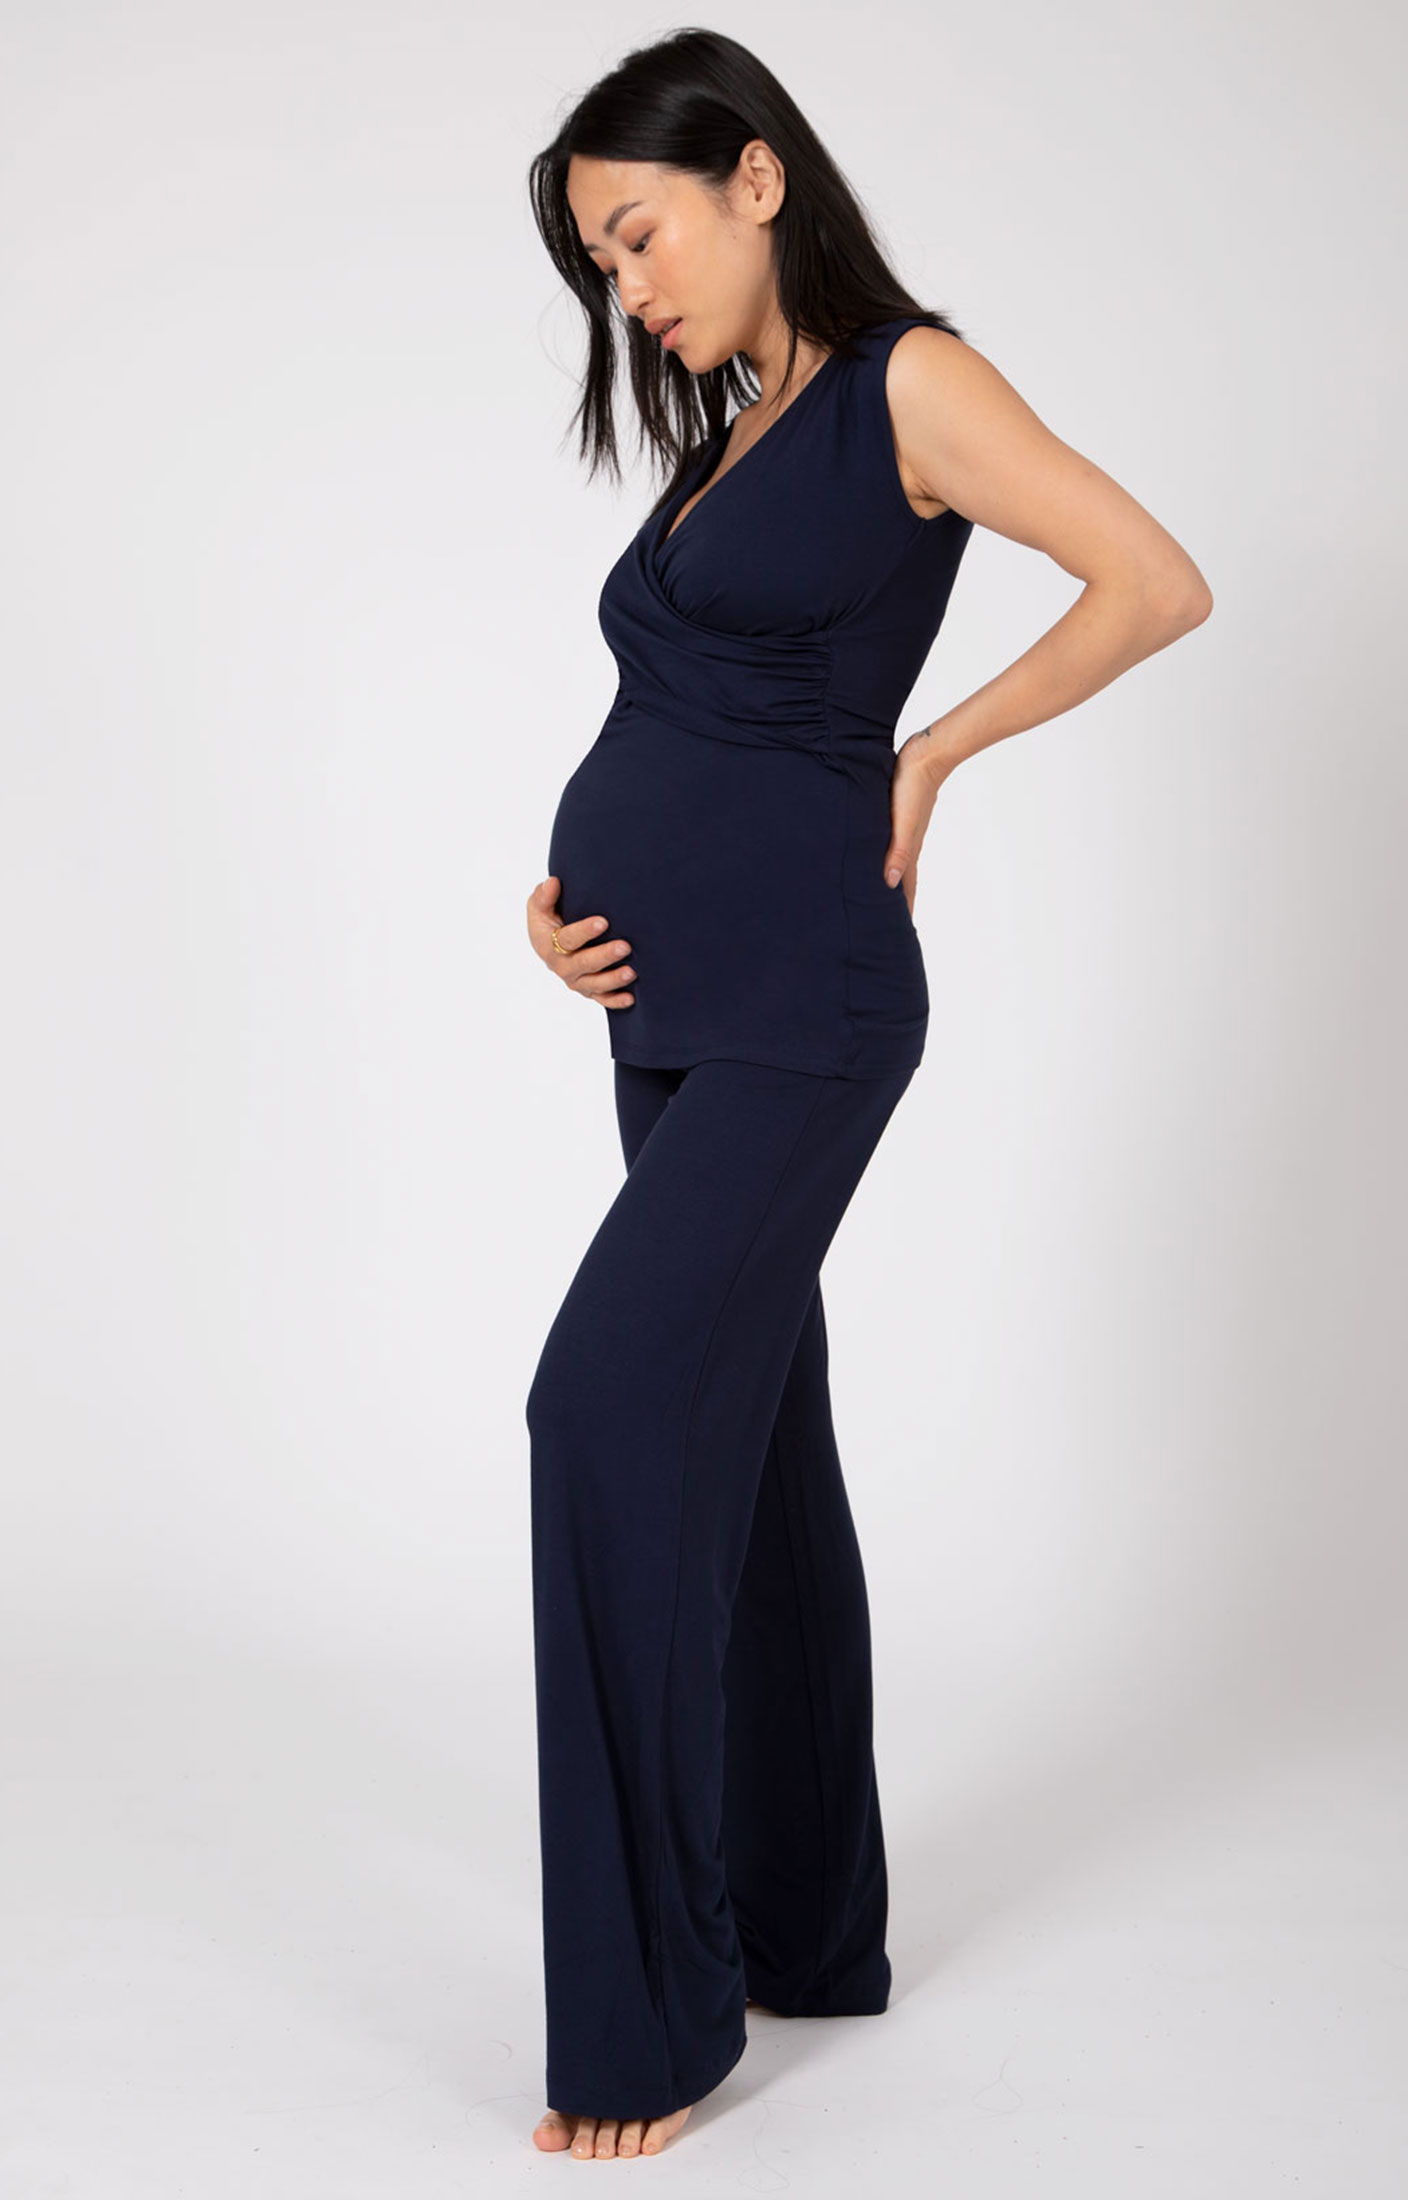 Celestine 3 Piece Maternity and Nursing Loungewear Set (Navy) - Maternity  Wedding Dresses, Evening Wear and Party Clothes by Tiffany Rose UK